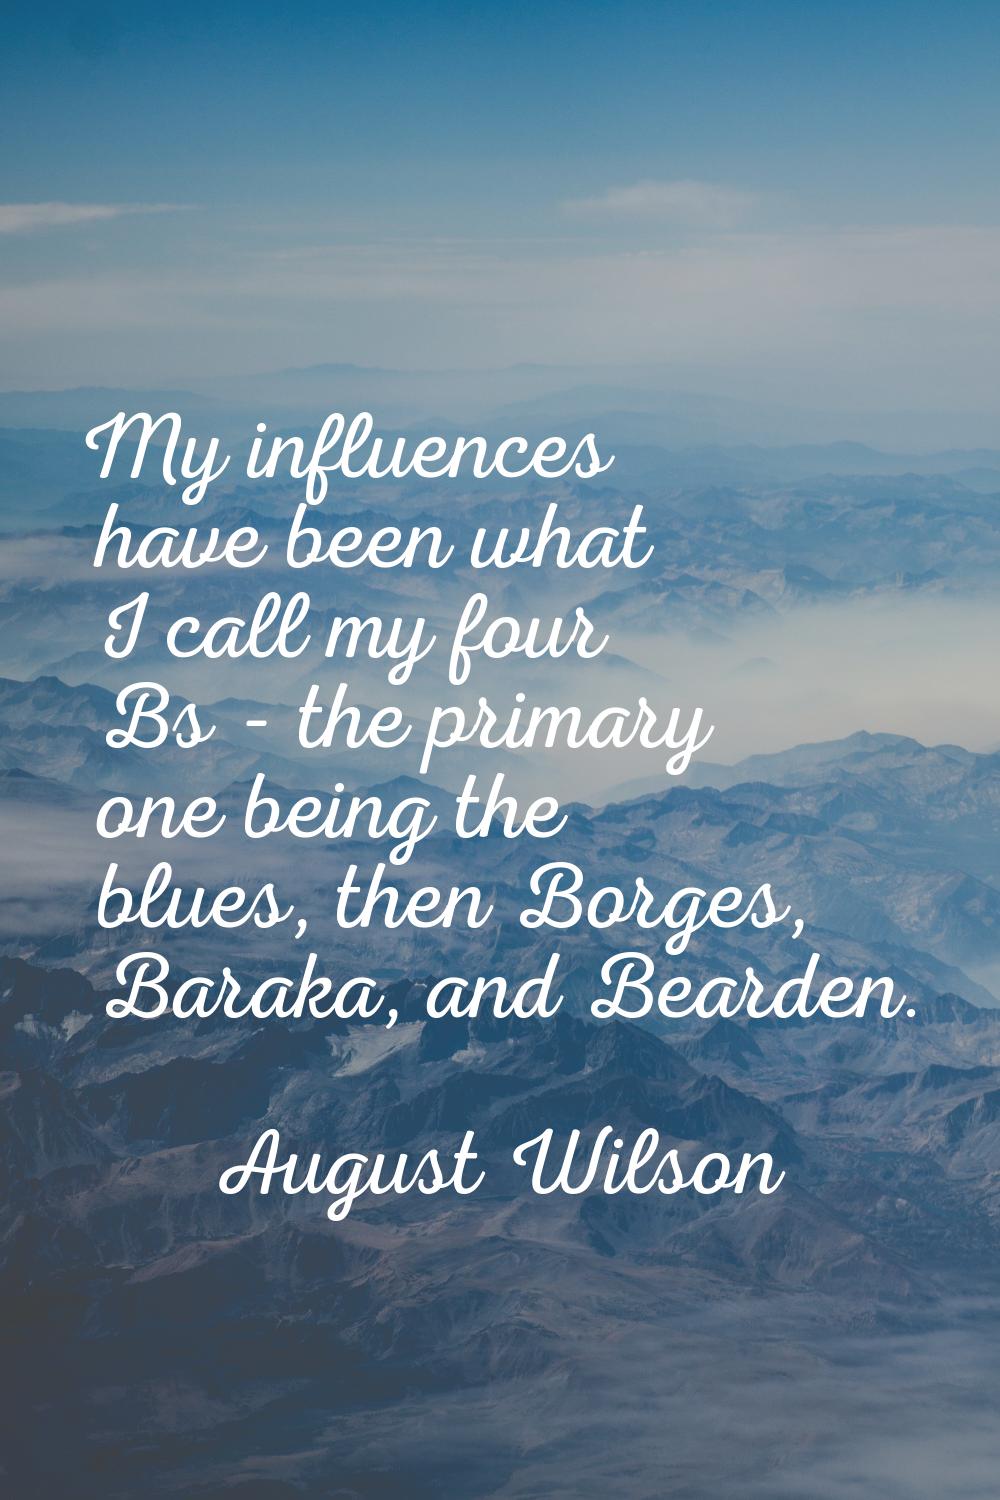 My influences have been what I call my four Bs - the primary one being the blues, then Borges, Bara